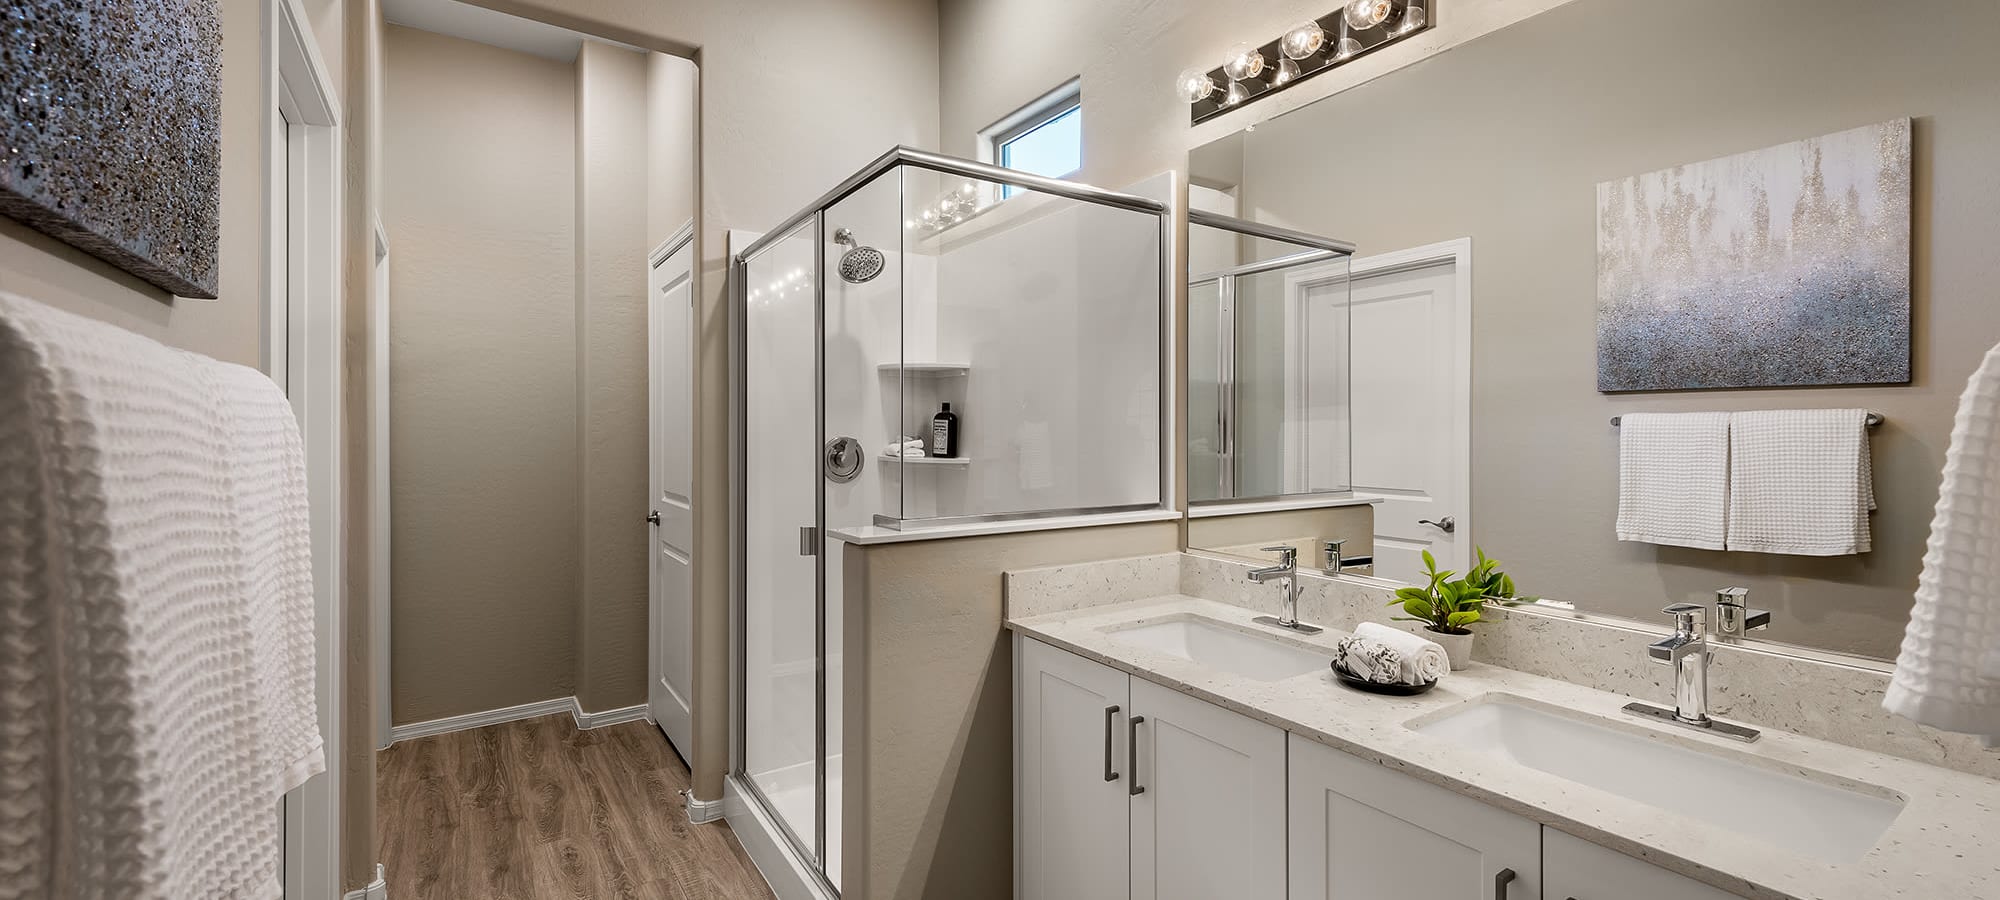 Modern bathroom with luxury finishes at TerraLane at South Mountain in Phoenix, Arizona